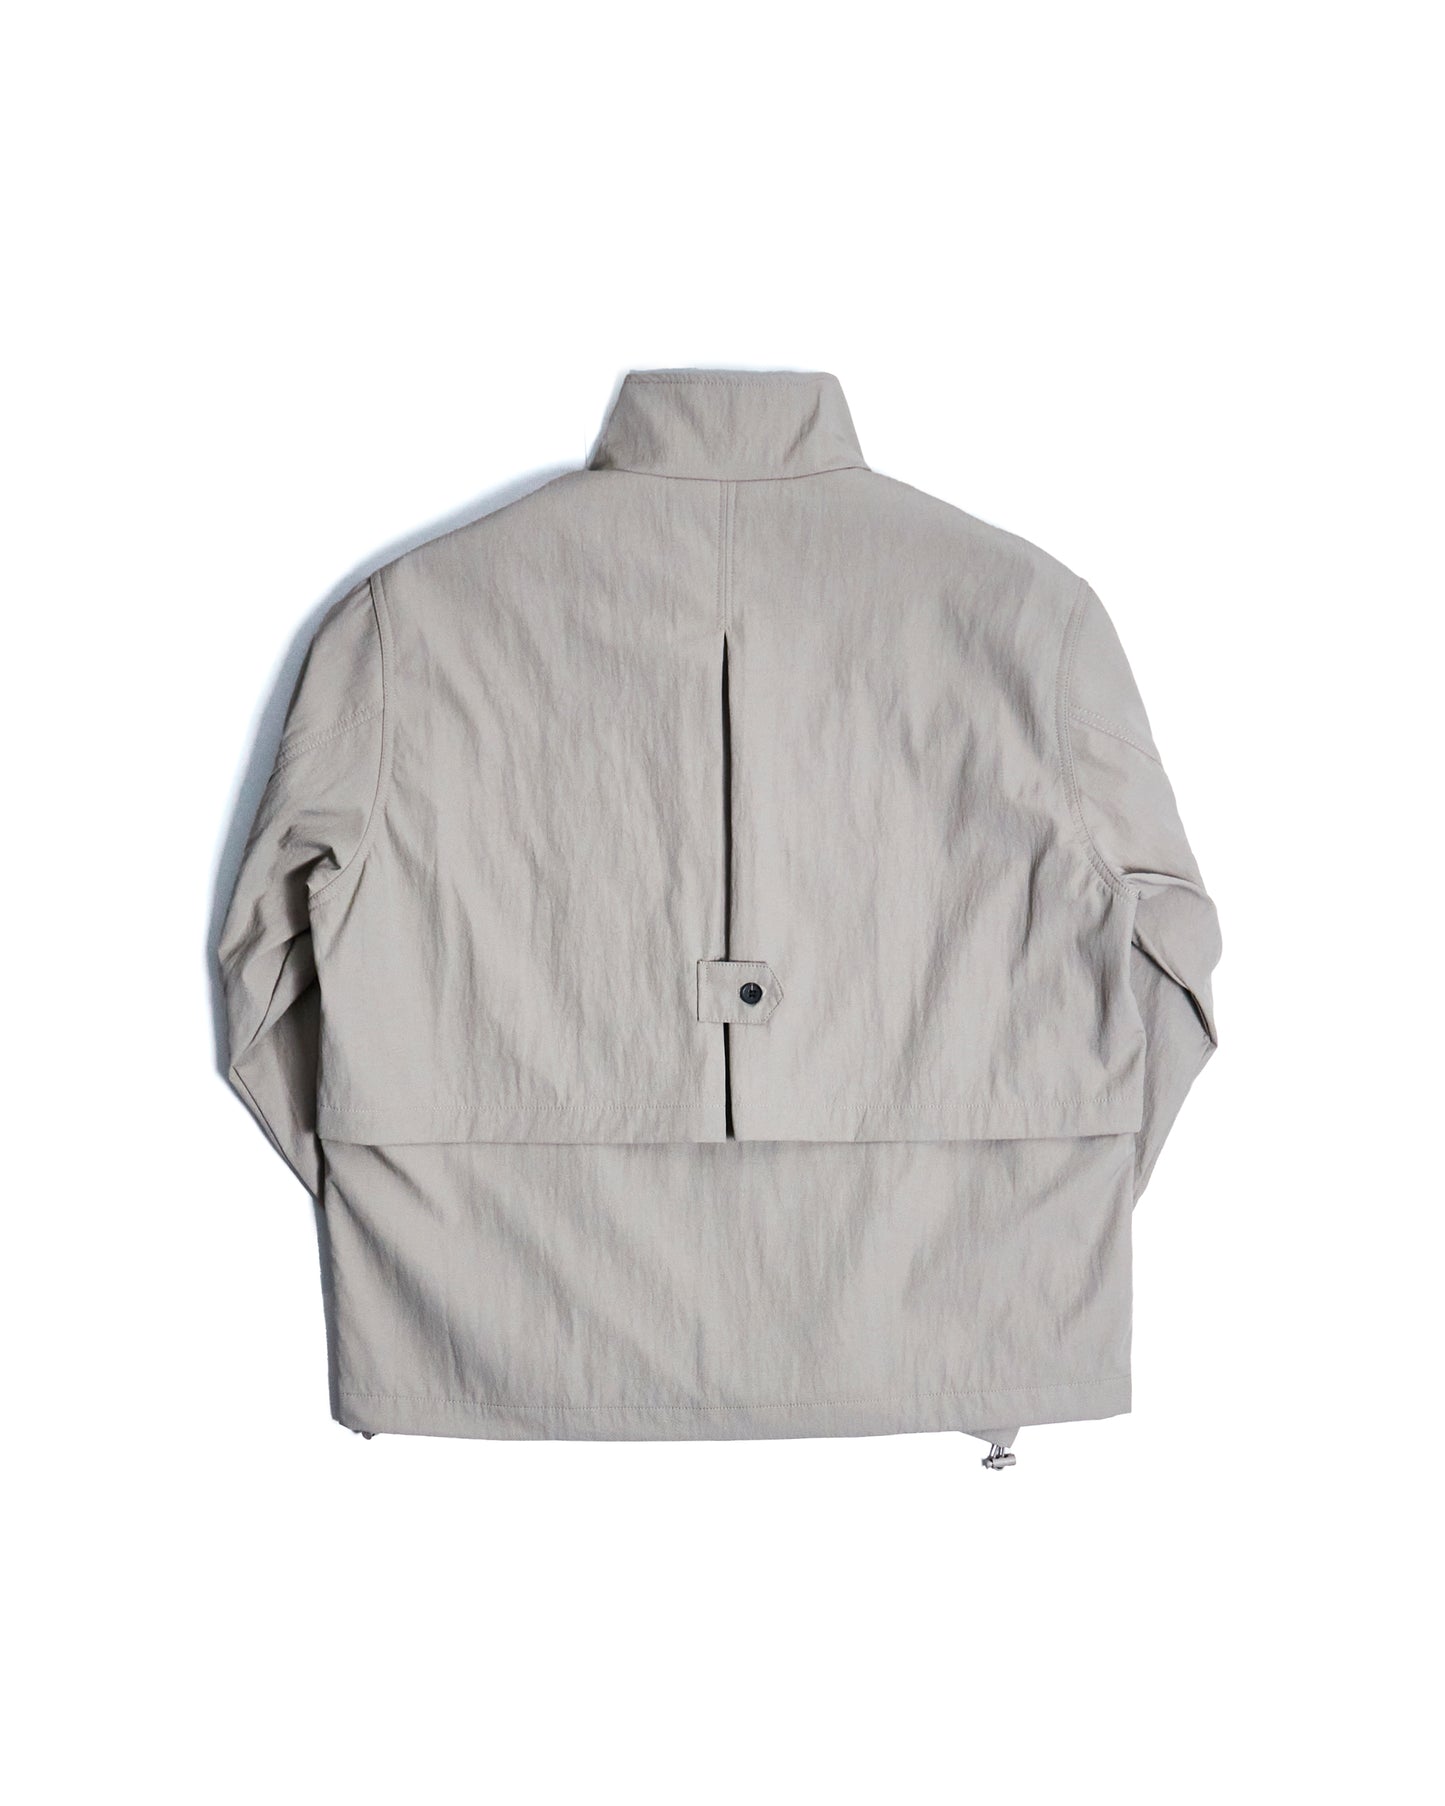 RELEASED WITHOUT CHARGE JACKET